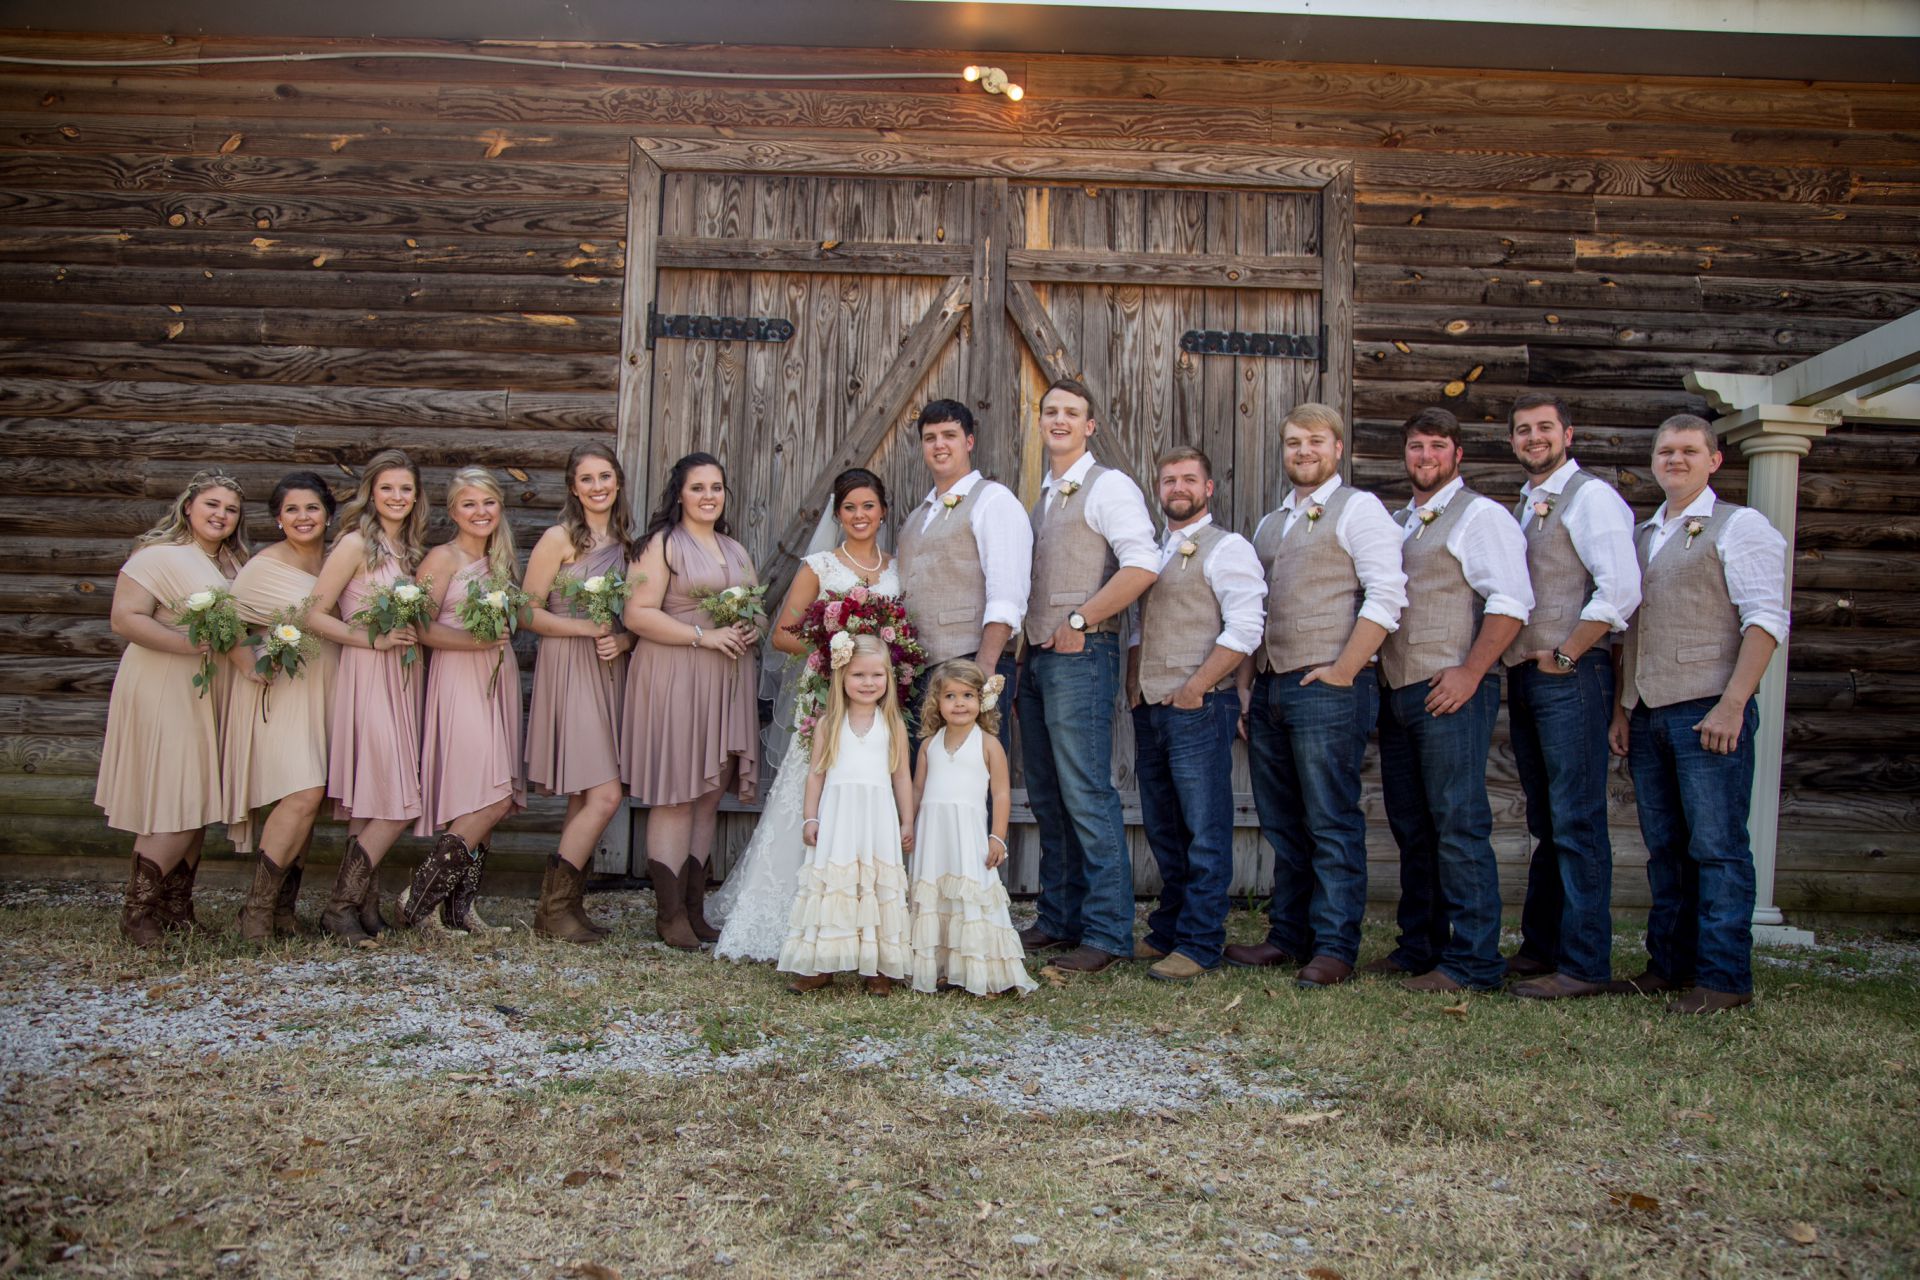 An image of a bridal party posing for a picture in front of a barn